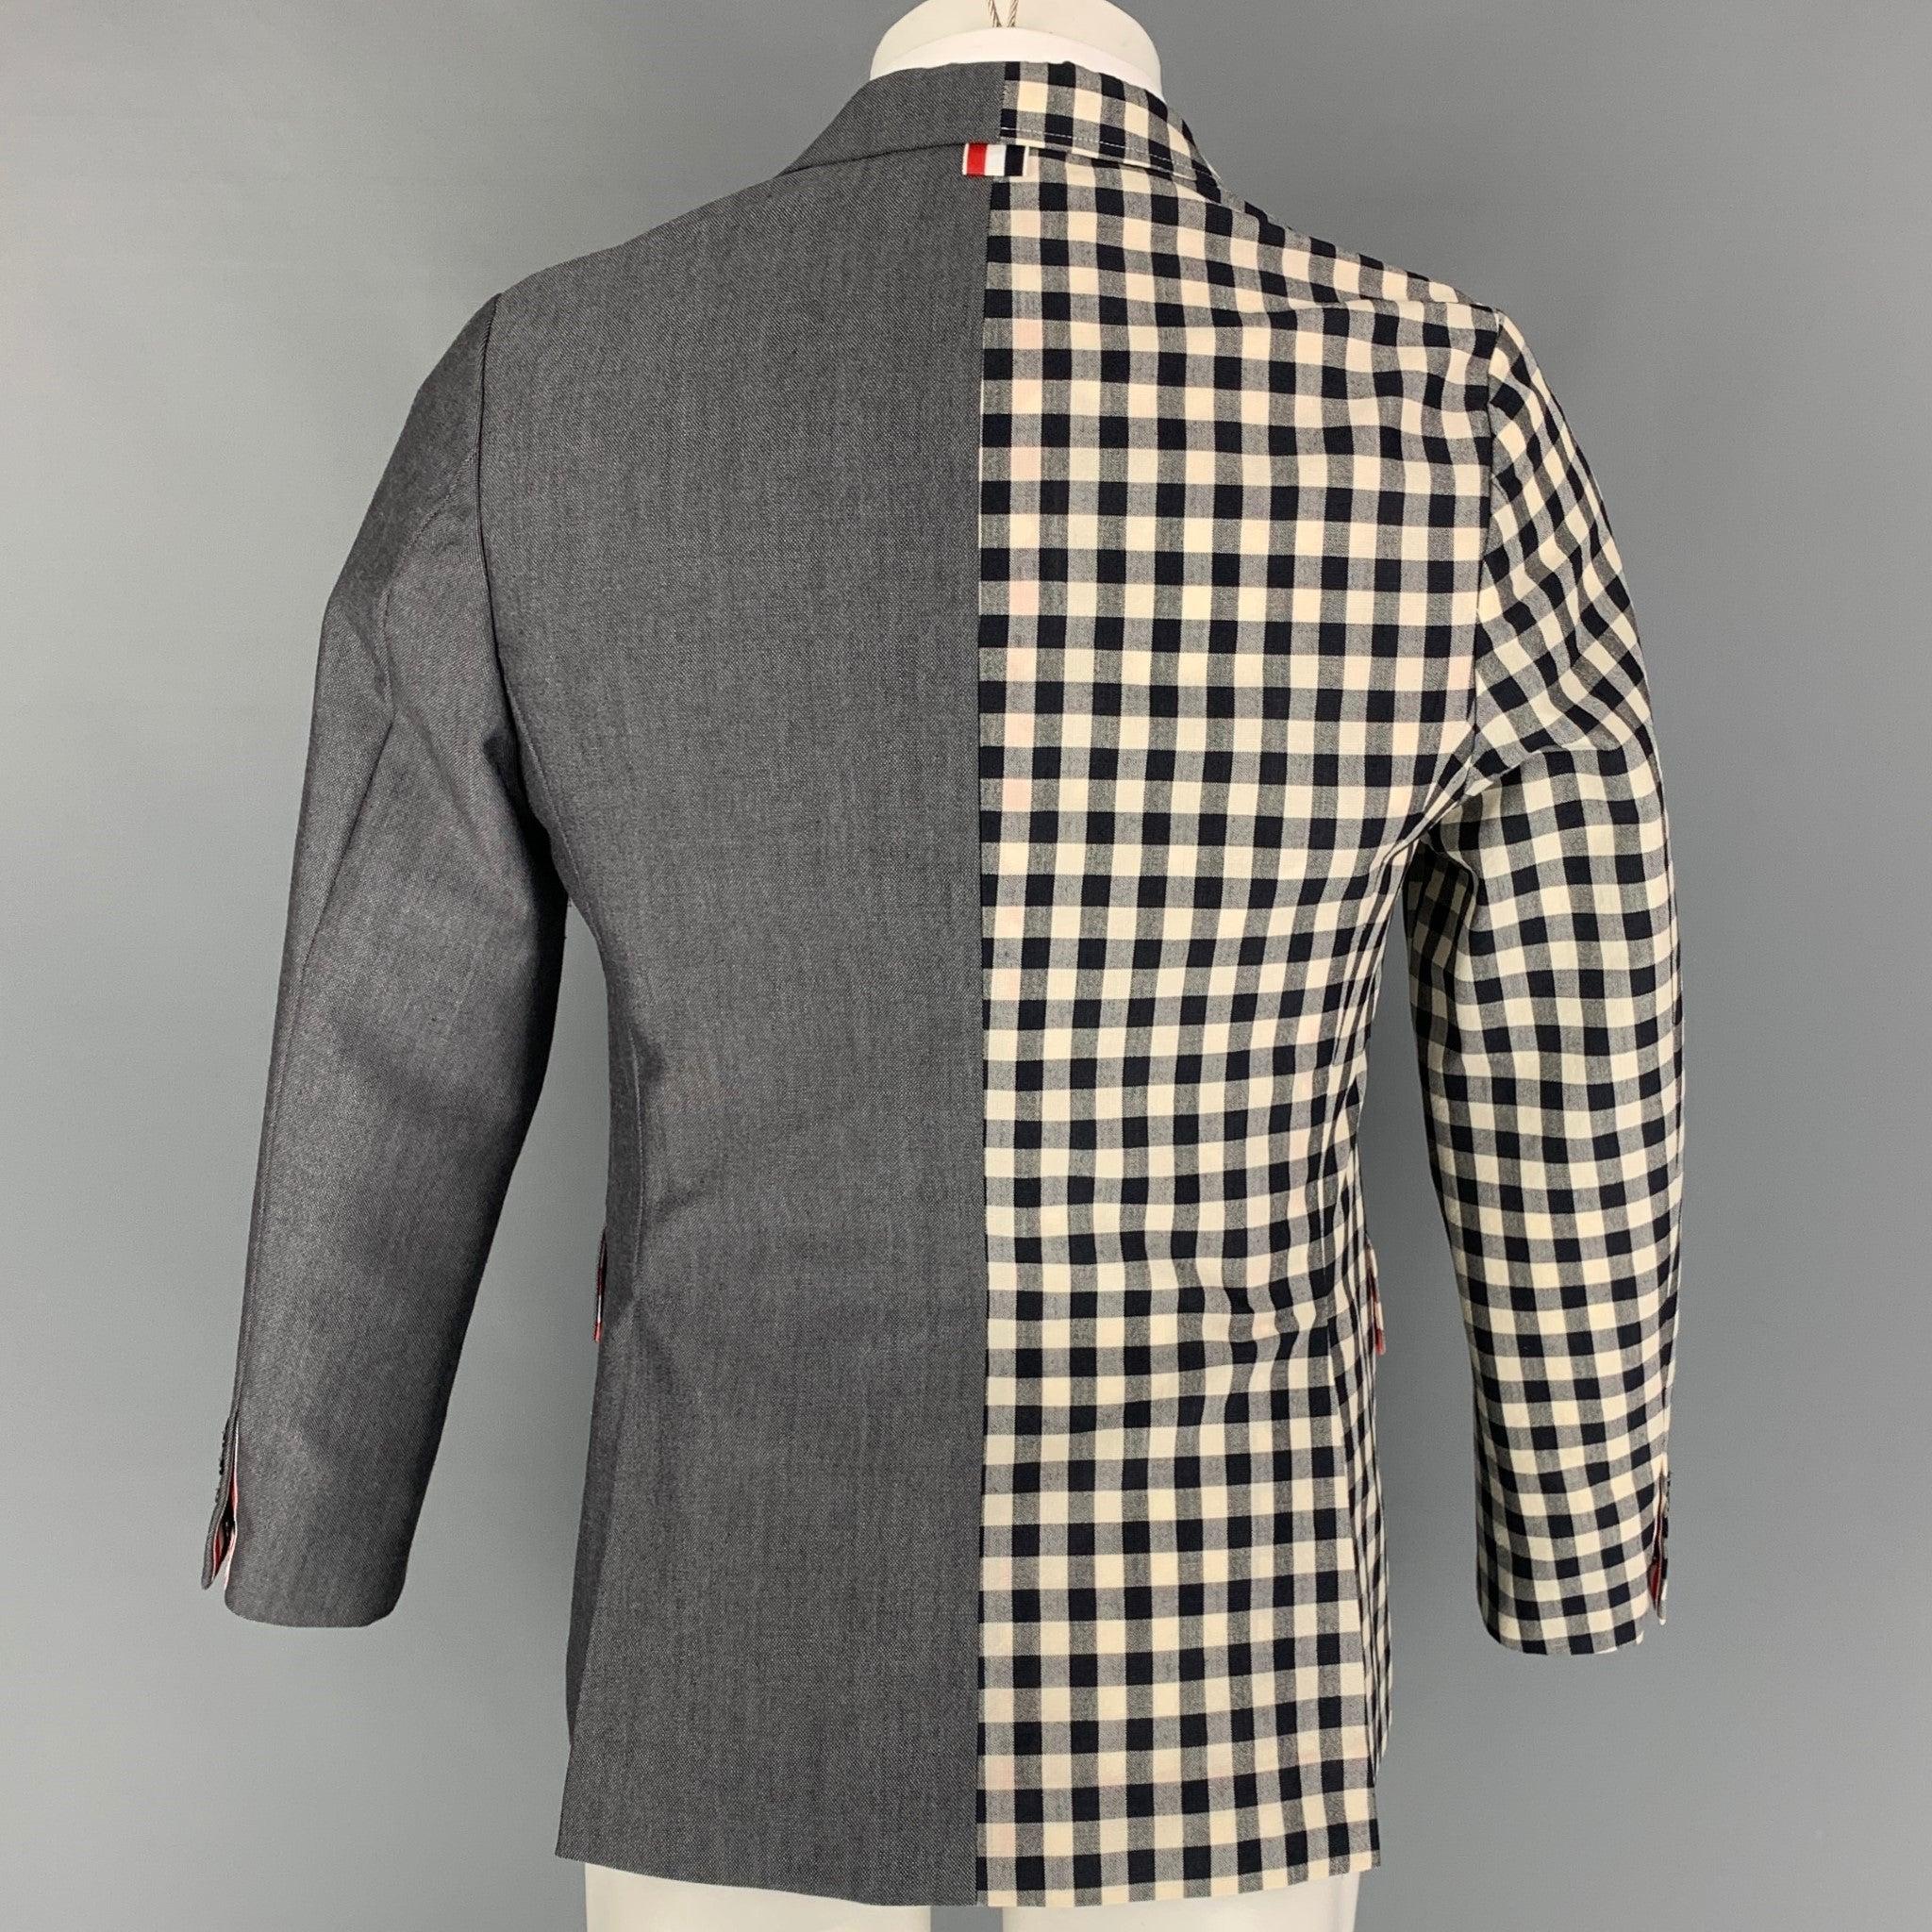 THOM BROWNE Size 38 Navy Red Checkered Wool Blend Notch Lapel Sport Coat In Good Condition For Sale In San Francisco, CA